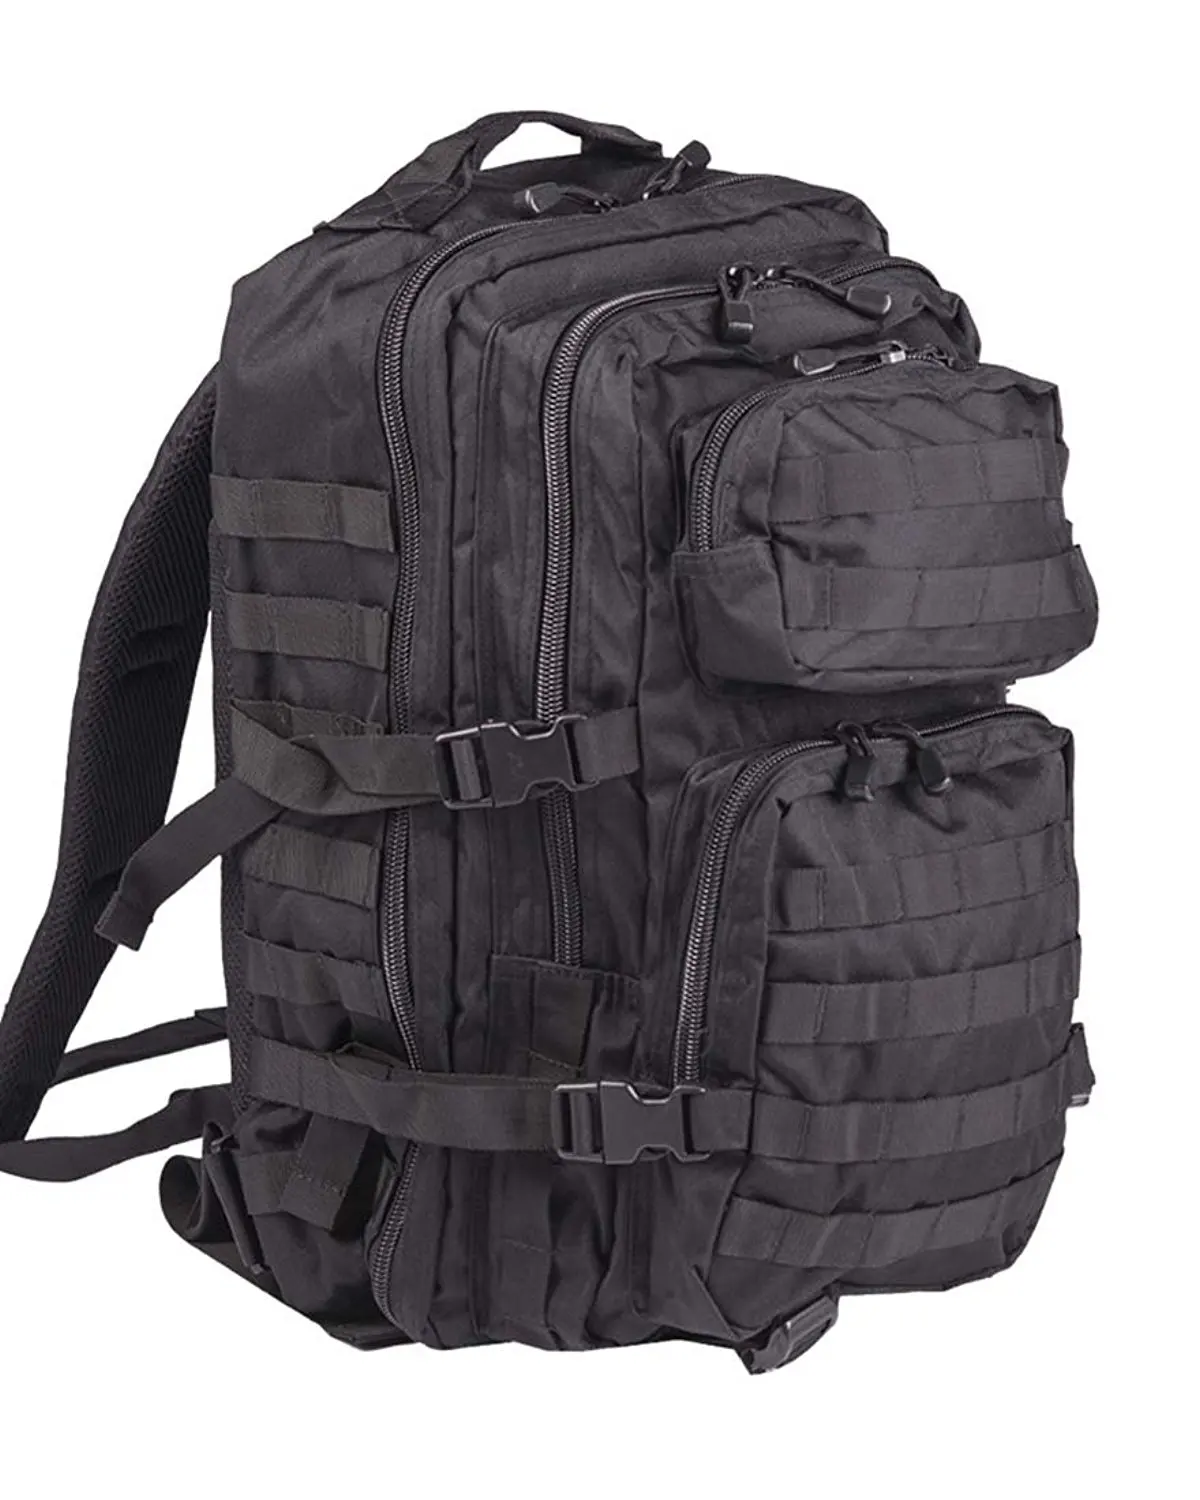 Buy Mil-Tec Military Army Patrol Molle Assault Pack Tactical Combat